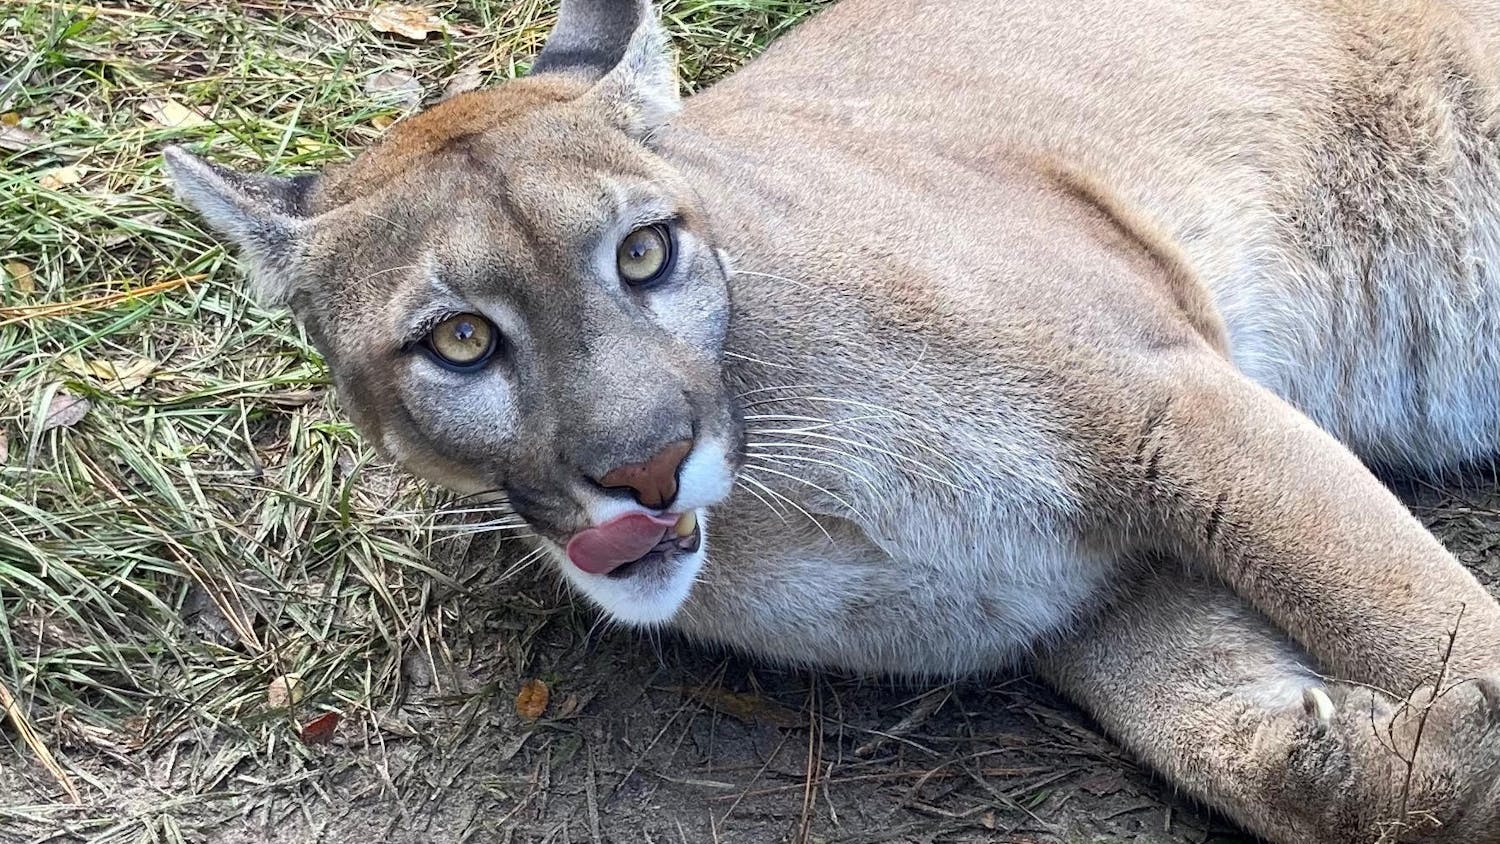 Dakota, a cougar, is pictured here.